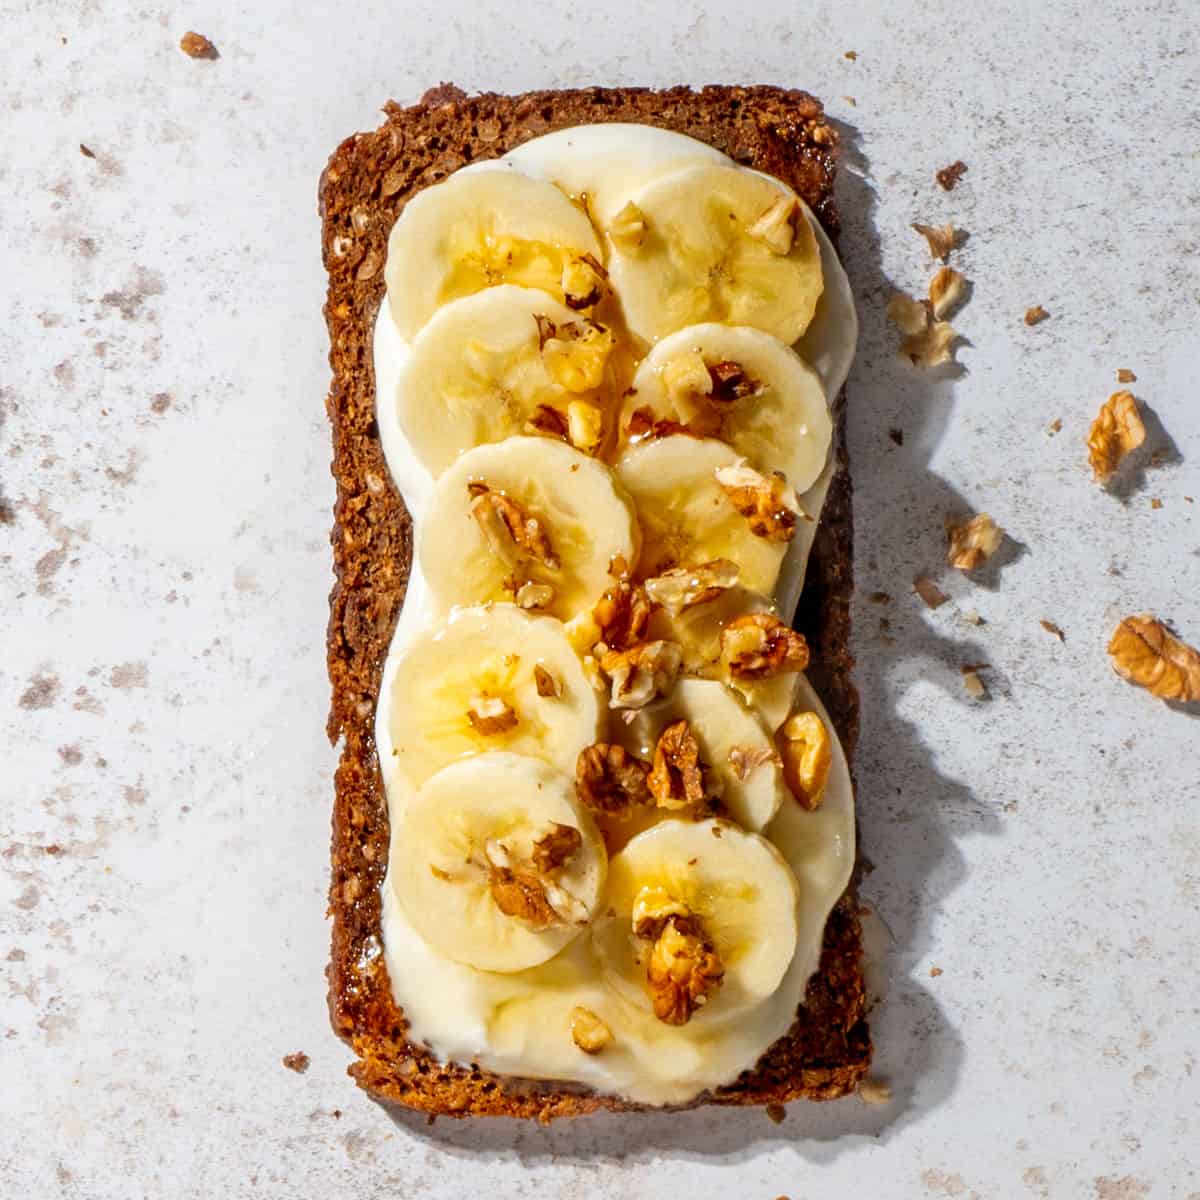 Cottage cheese toast with banana and honey topping.